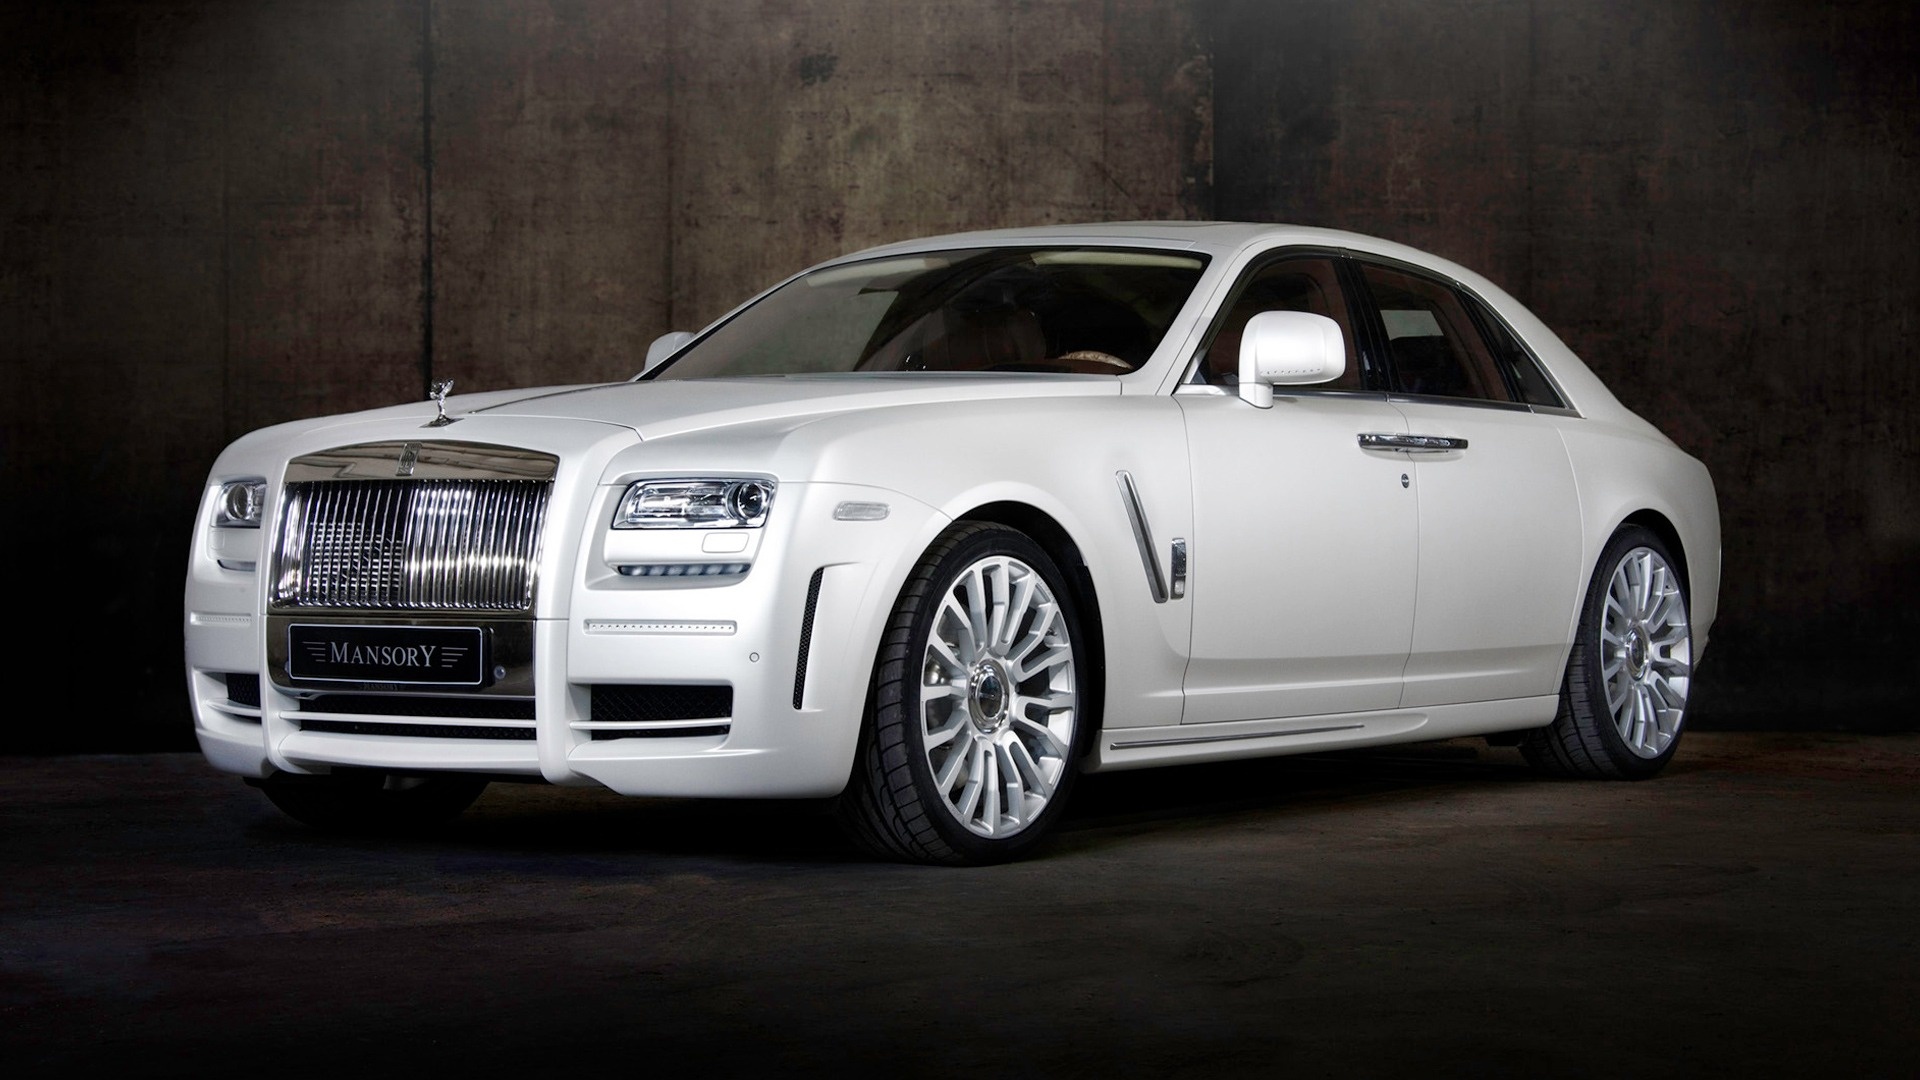 Awesome Rolls Royce